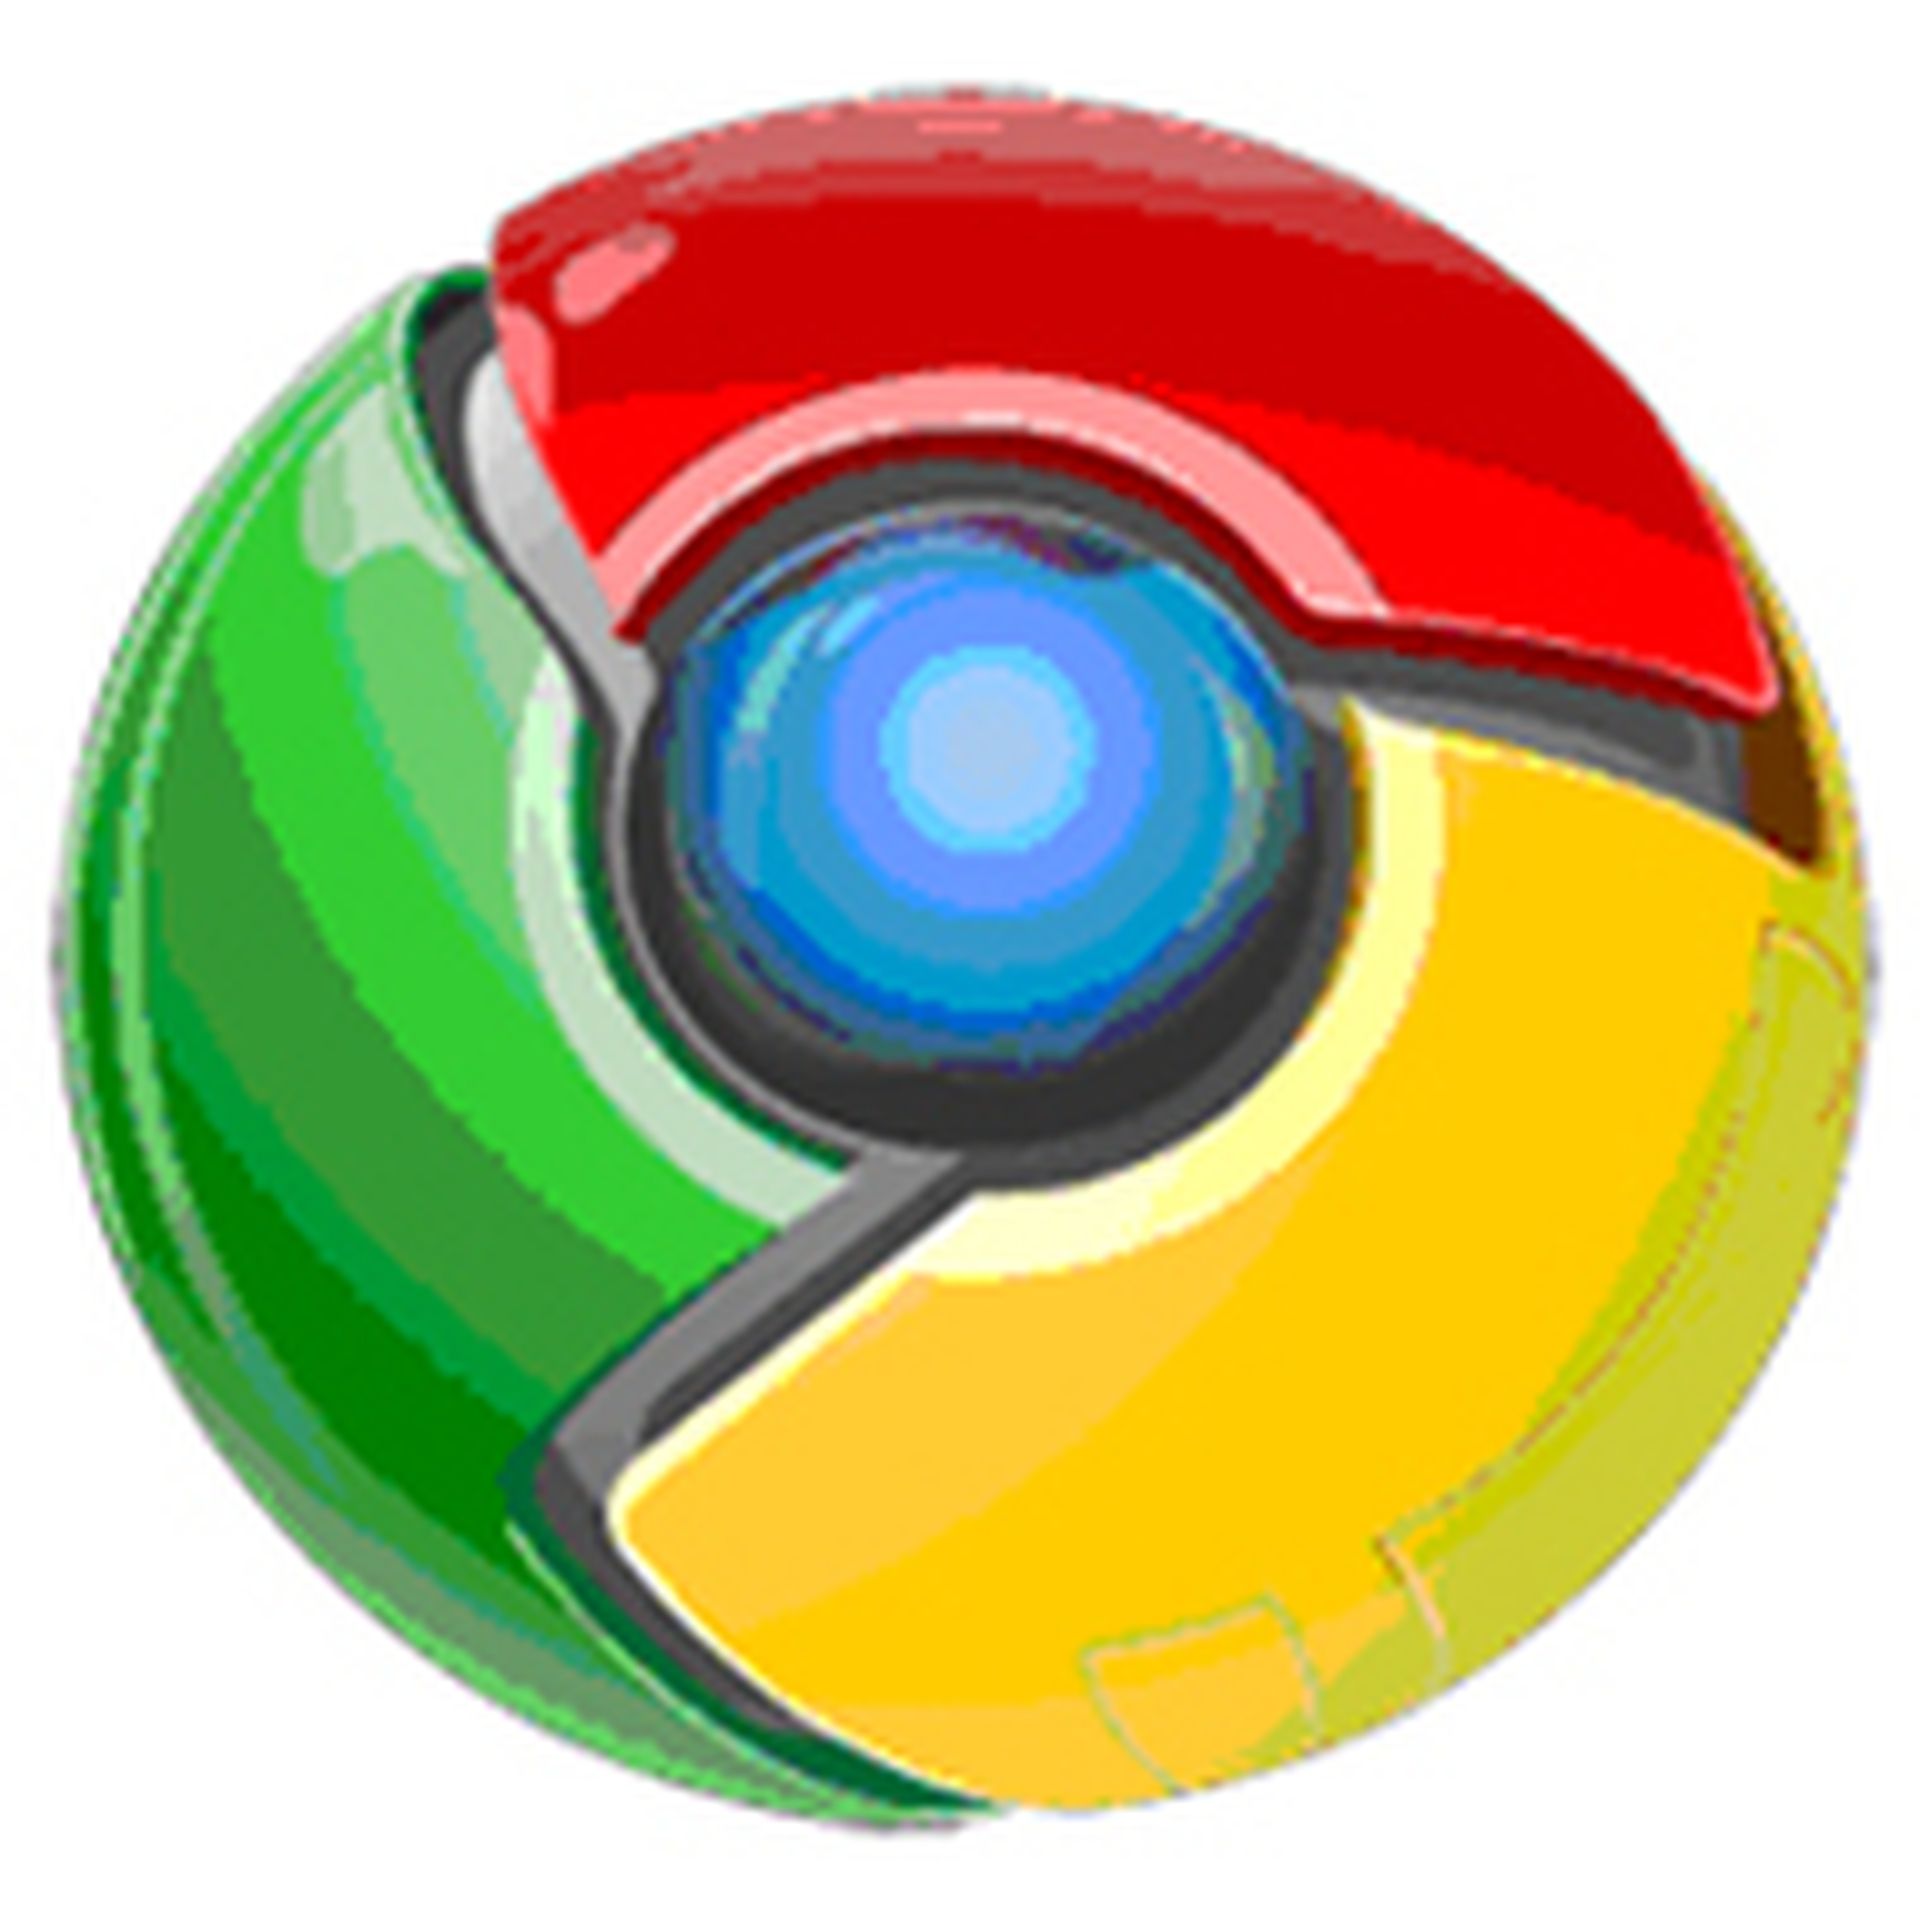 Malicious Google Chrome extension collected users' data for third parties